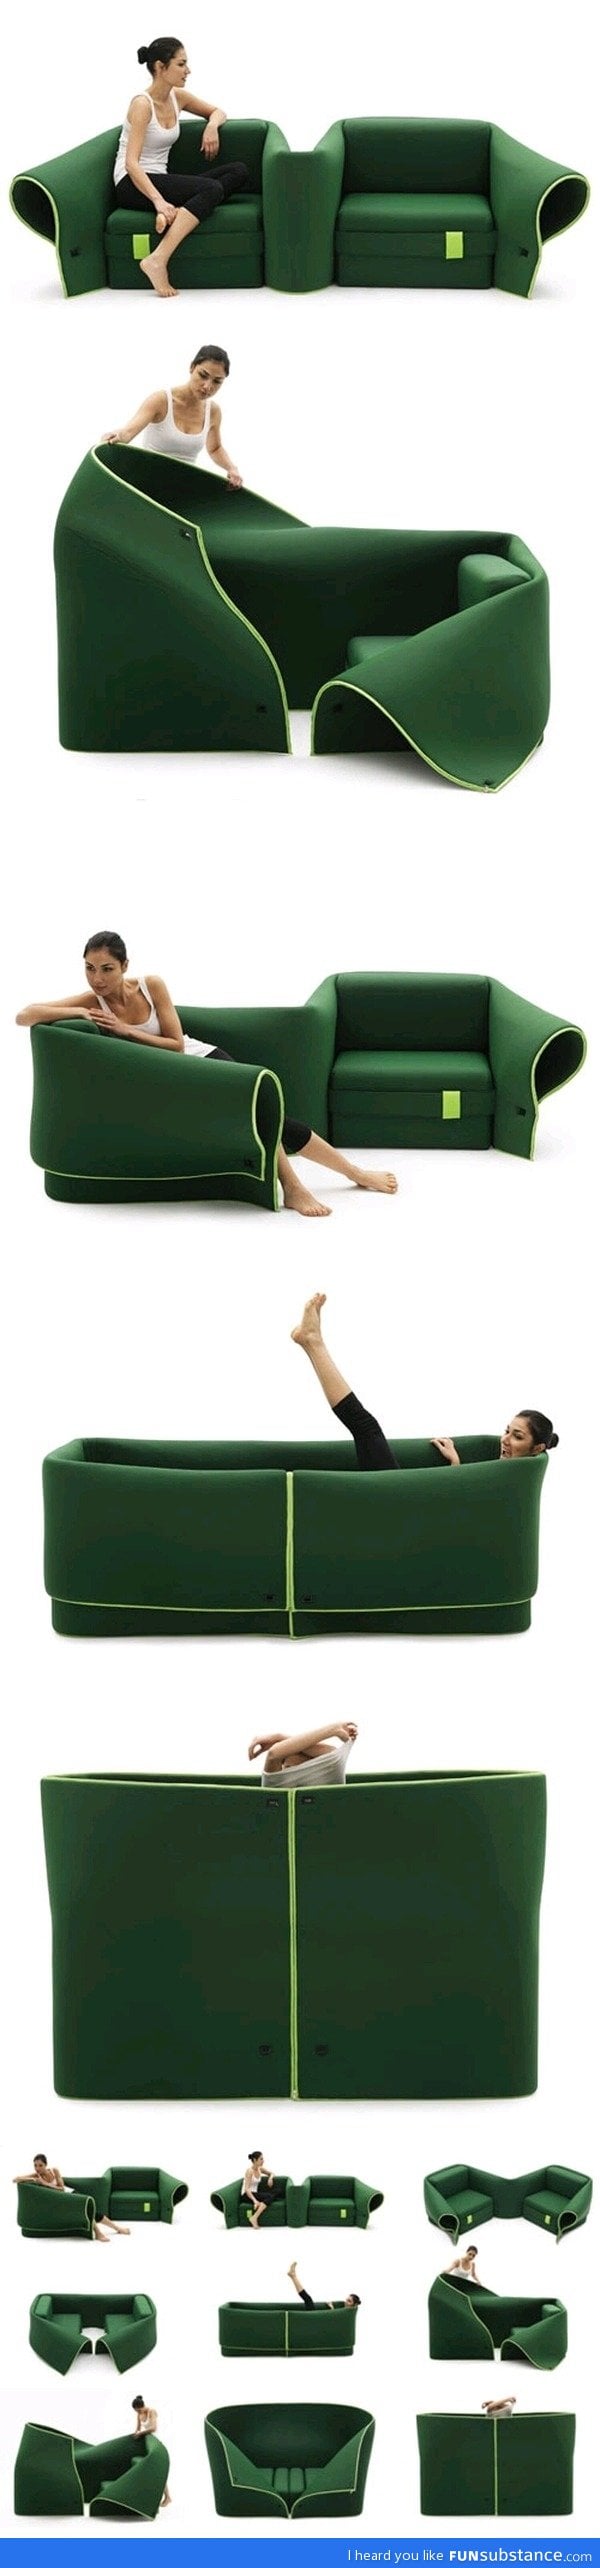 Foldable couch